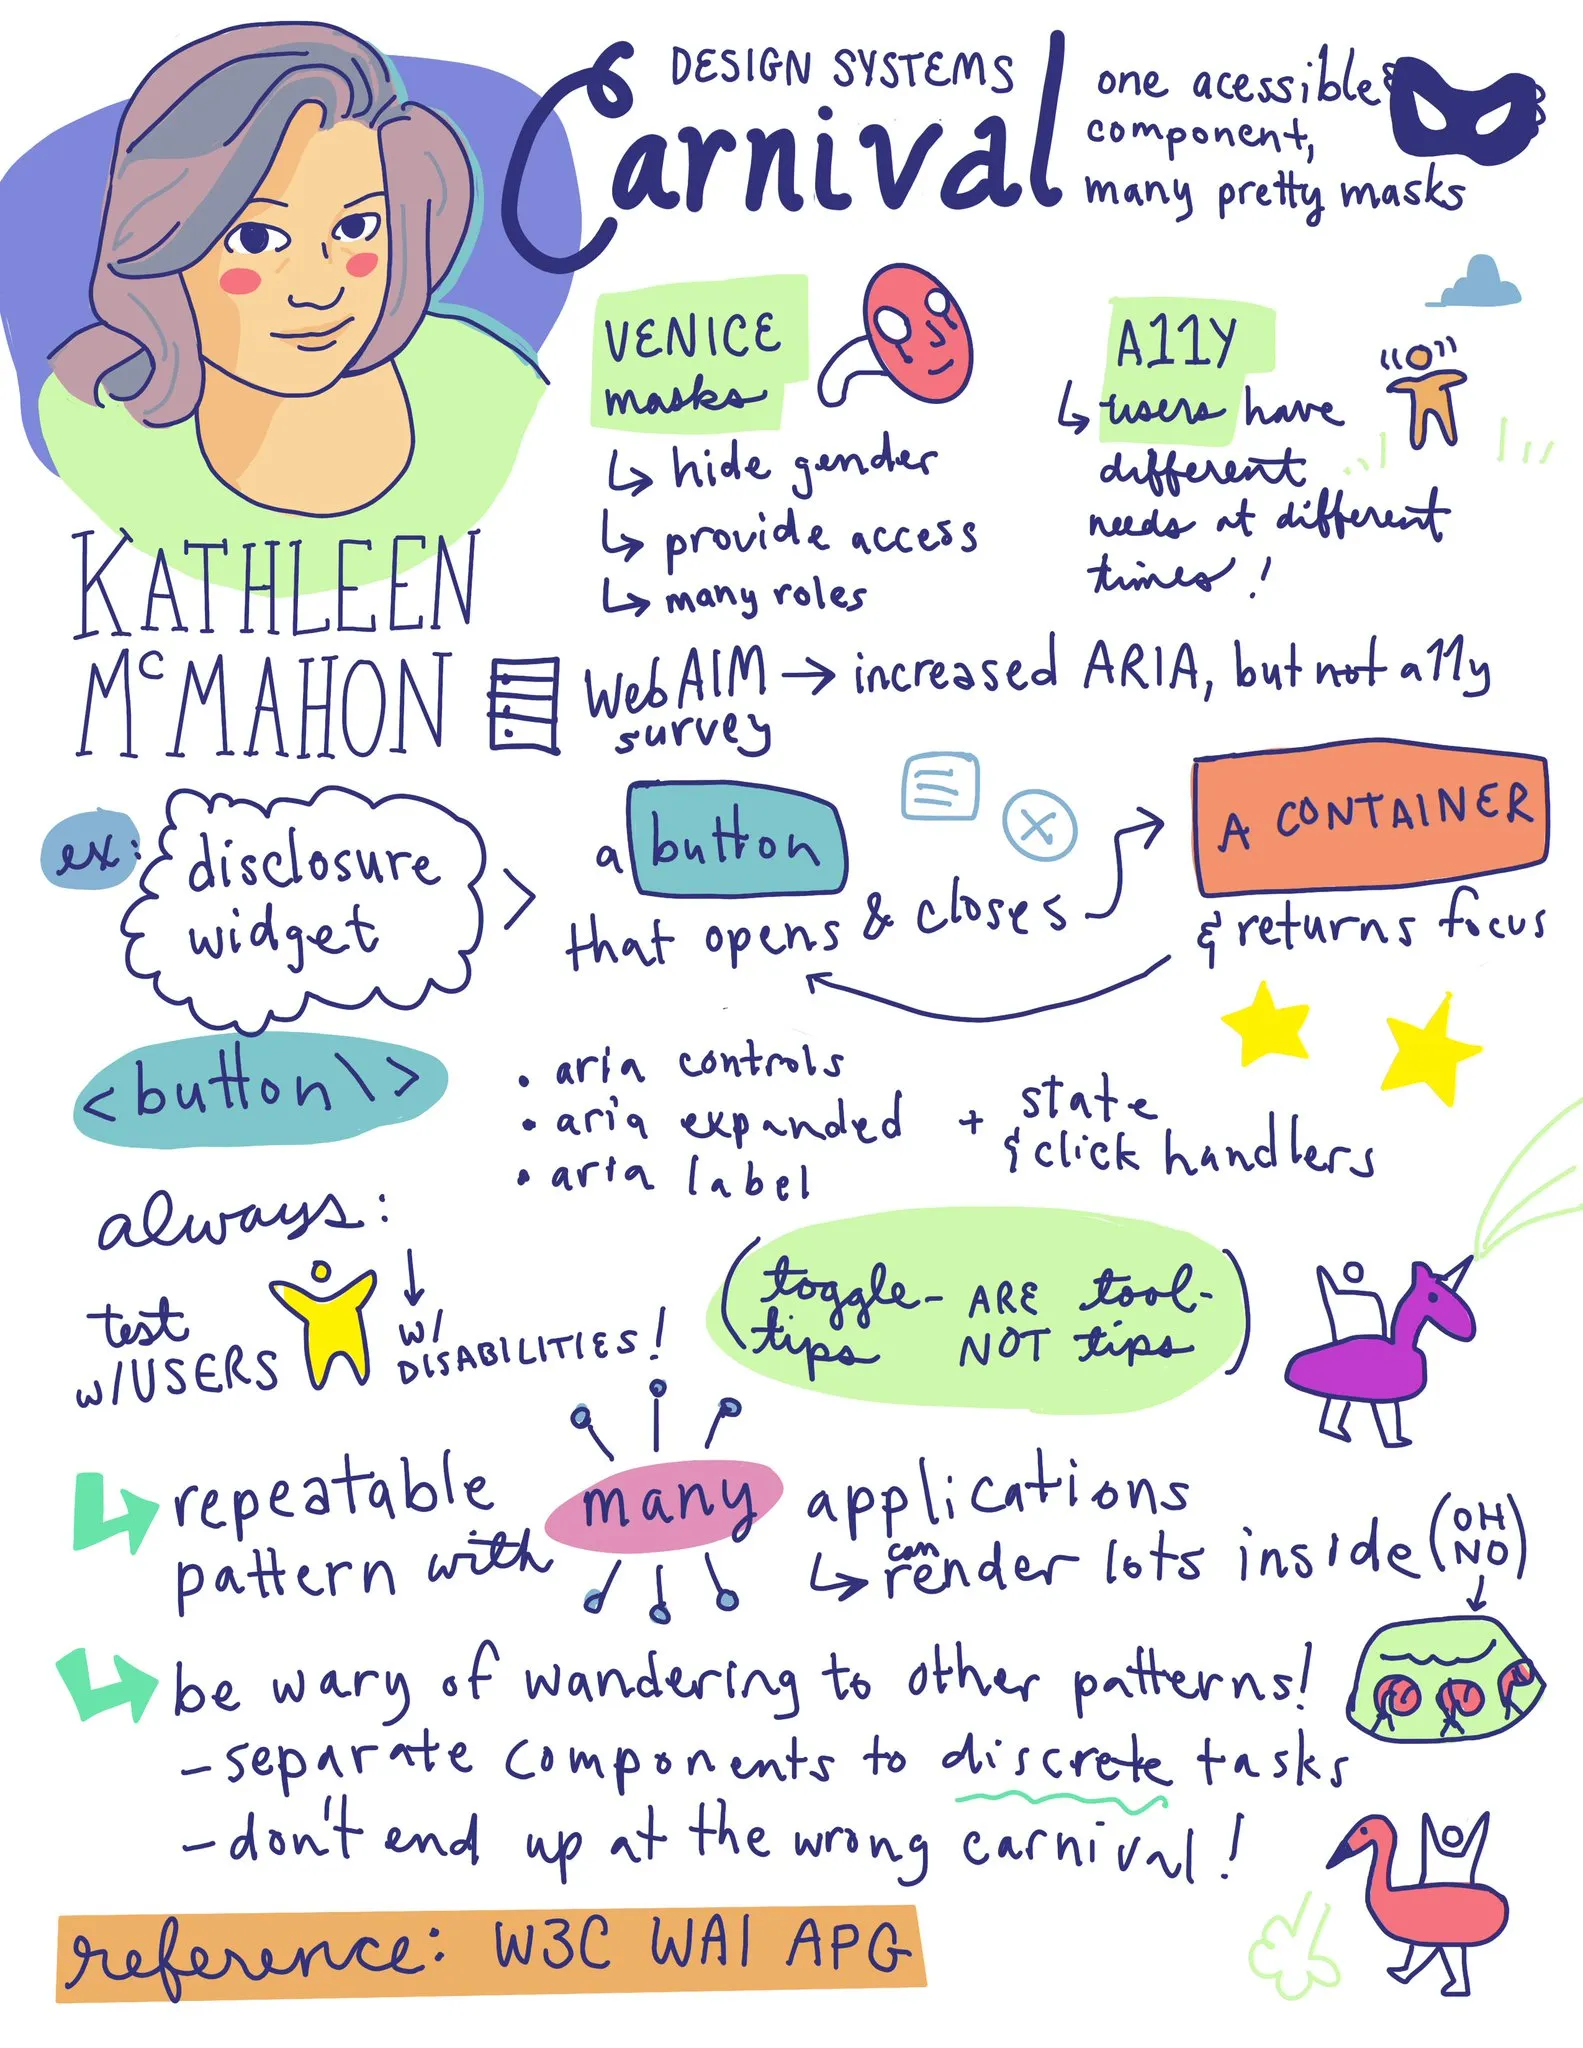 sketchnote for KATHLEEN McMAHON Design Systems Carnival.